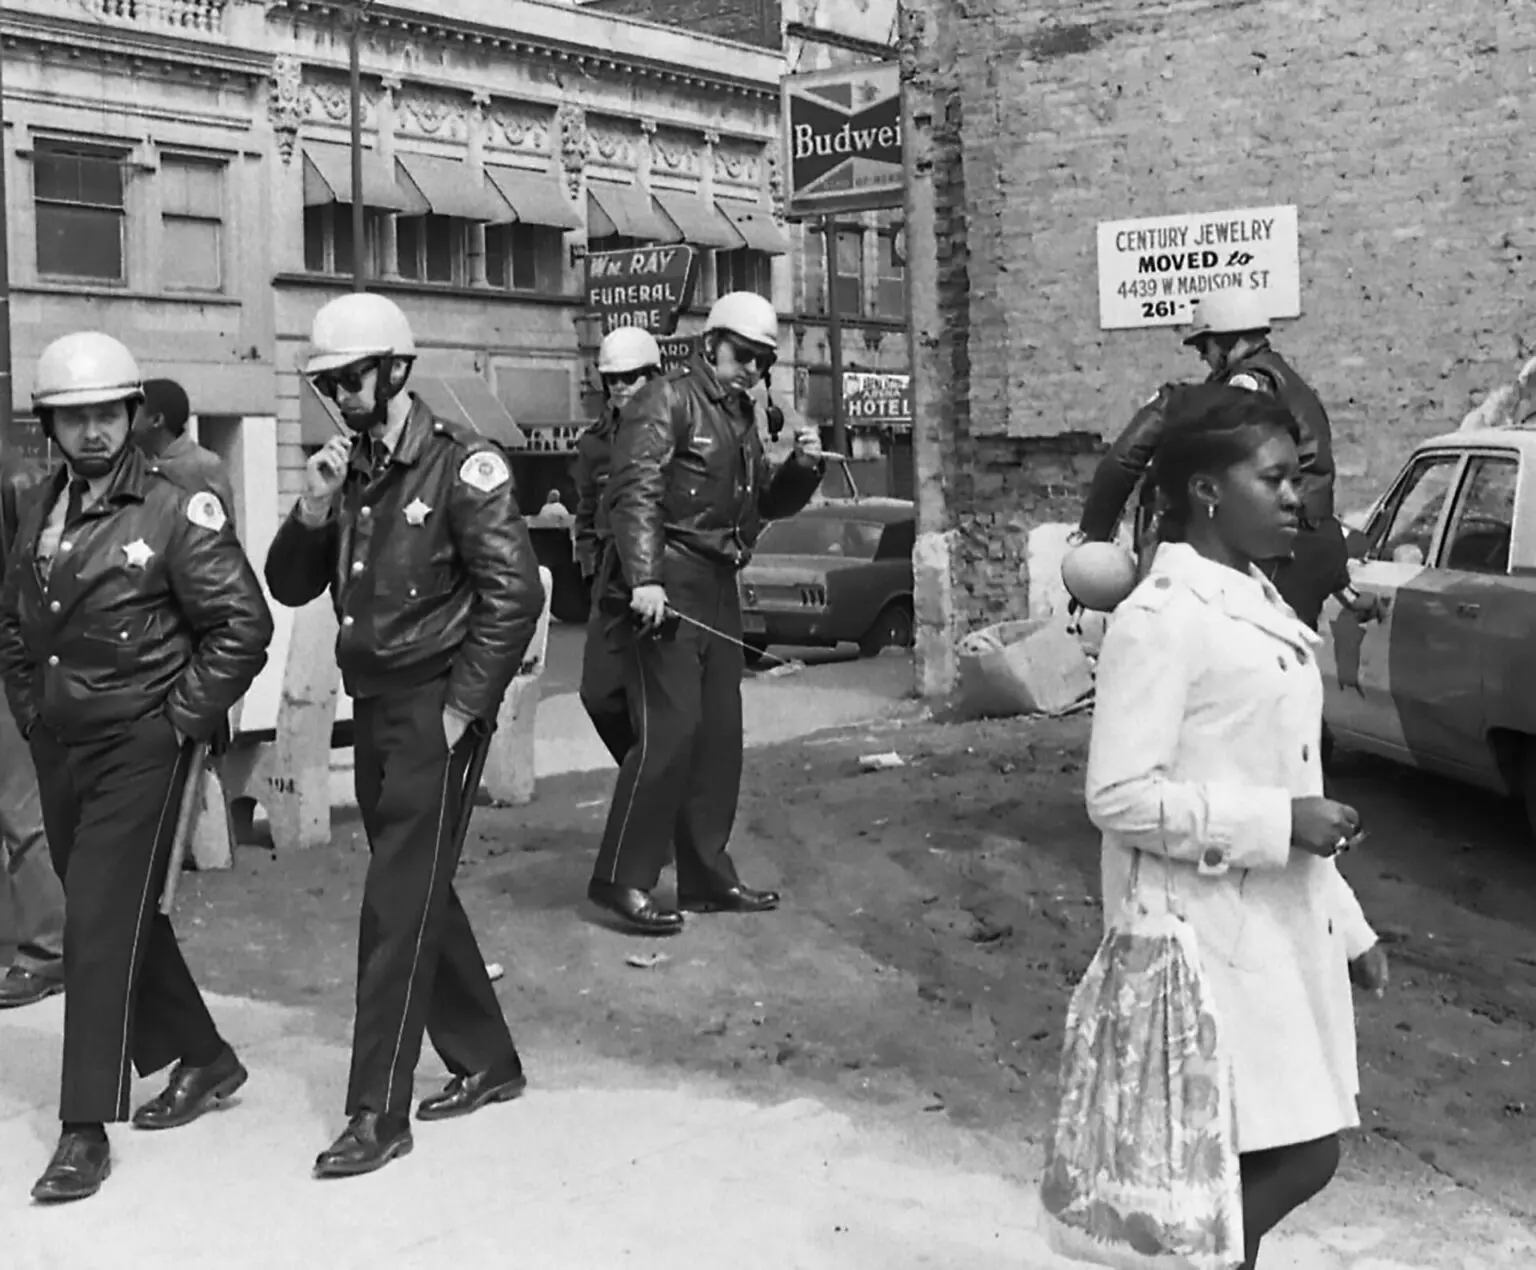 In 1968, amid the aftermath of Chicago riots, I photographed police interacting with a girl for the Chicago Daily Defender. The image reflects the tensions and police authority of the time.